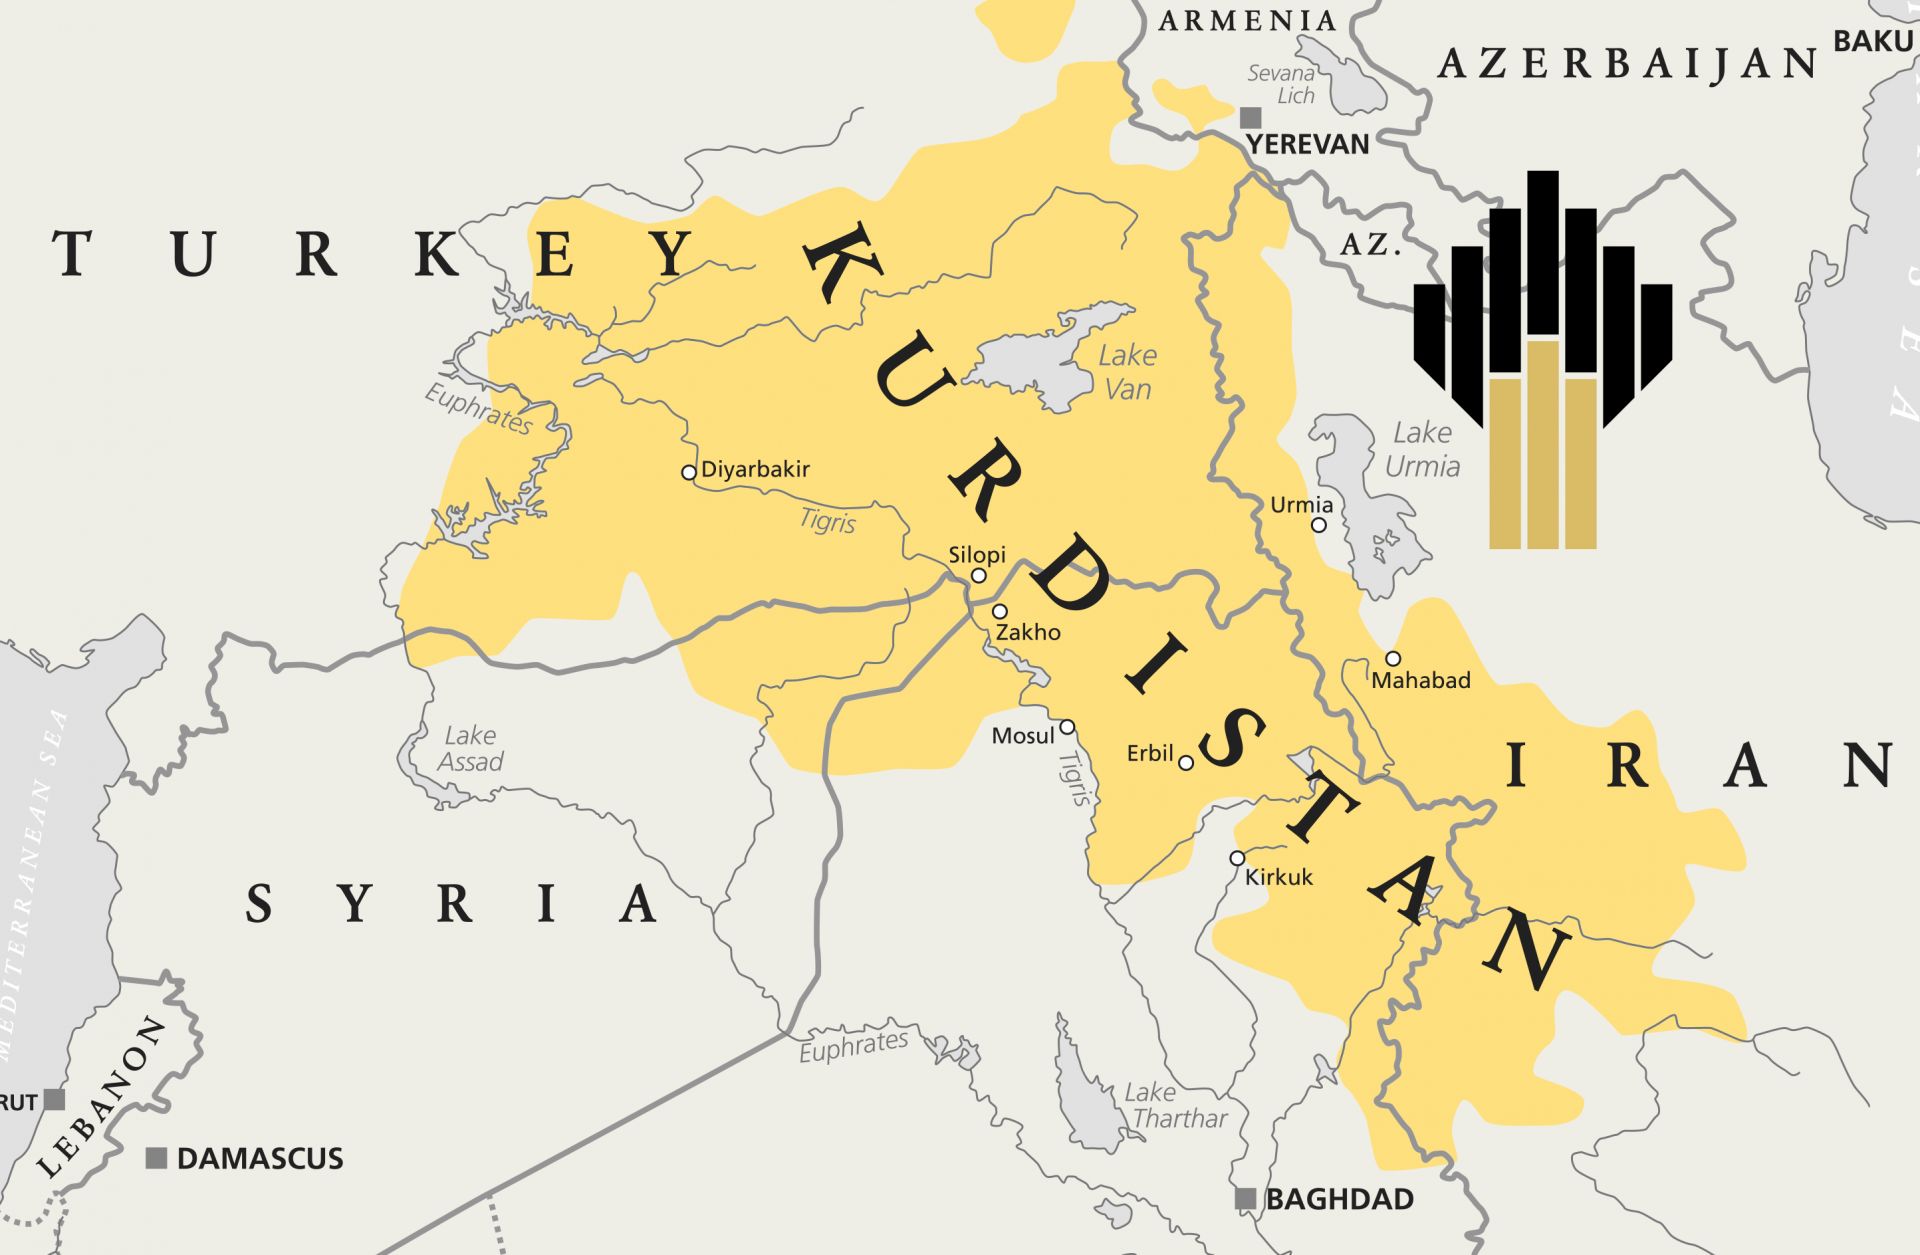 Aware of the advantages the governments in Baghdad and Ankara have over its oil export pipelines, the Kurdistan Regional Government is looking for ways to even the playing field with its neighbors.